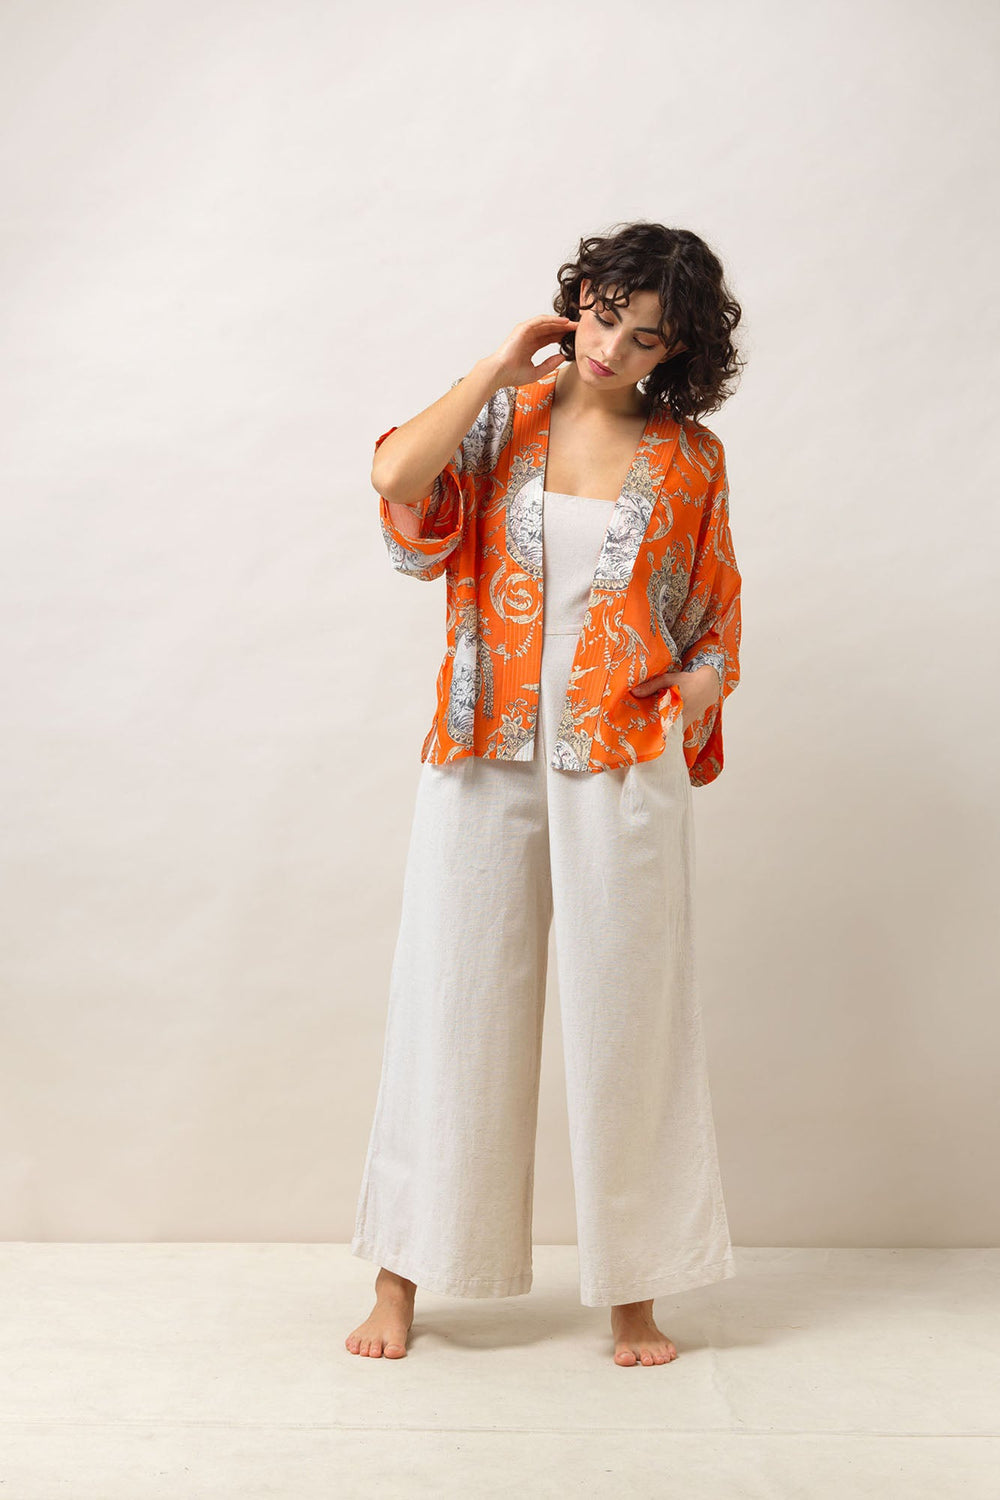 Women's short kimono in orange with valentine floral print by One Hundred Stars